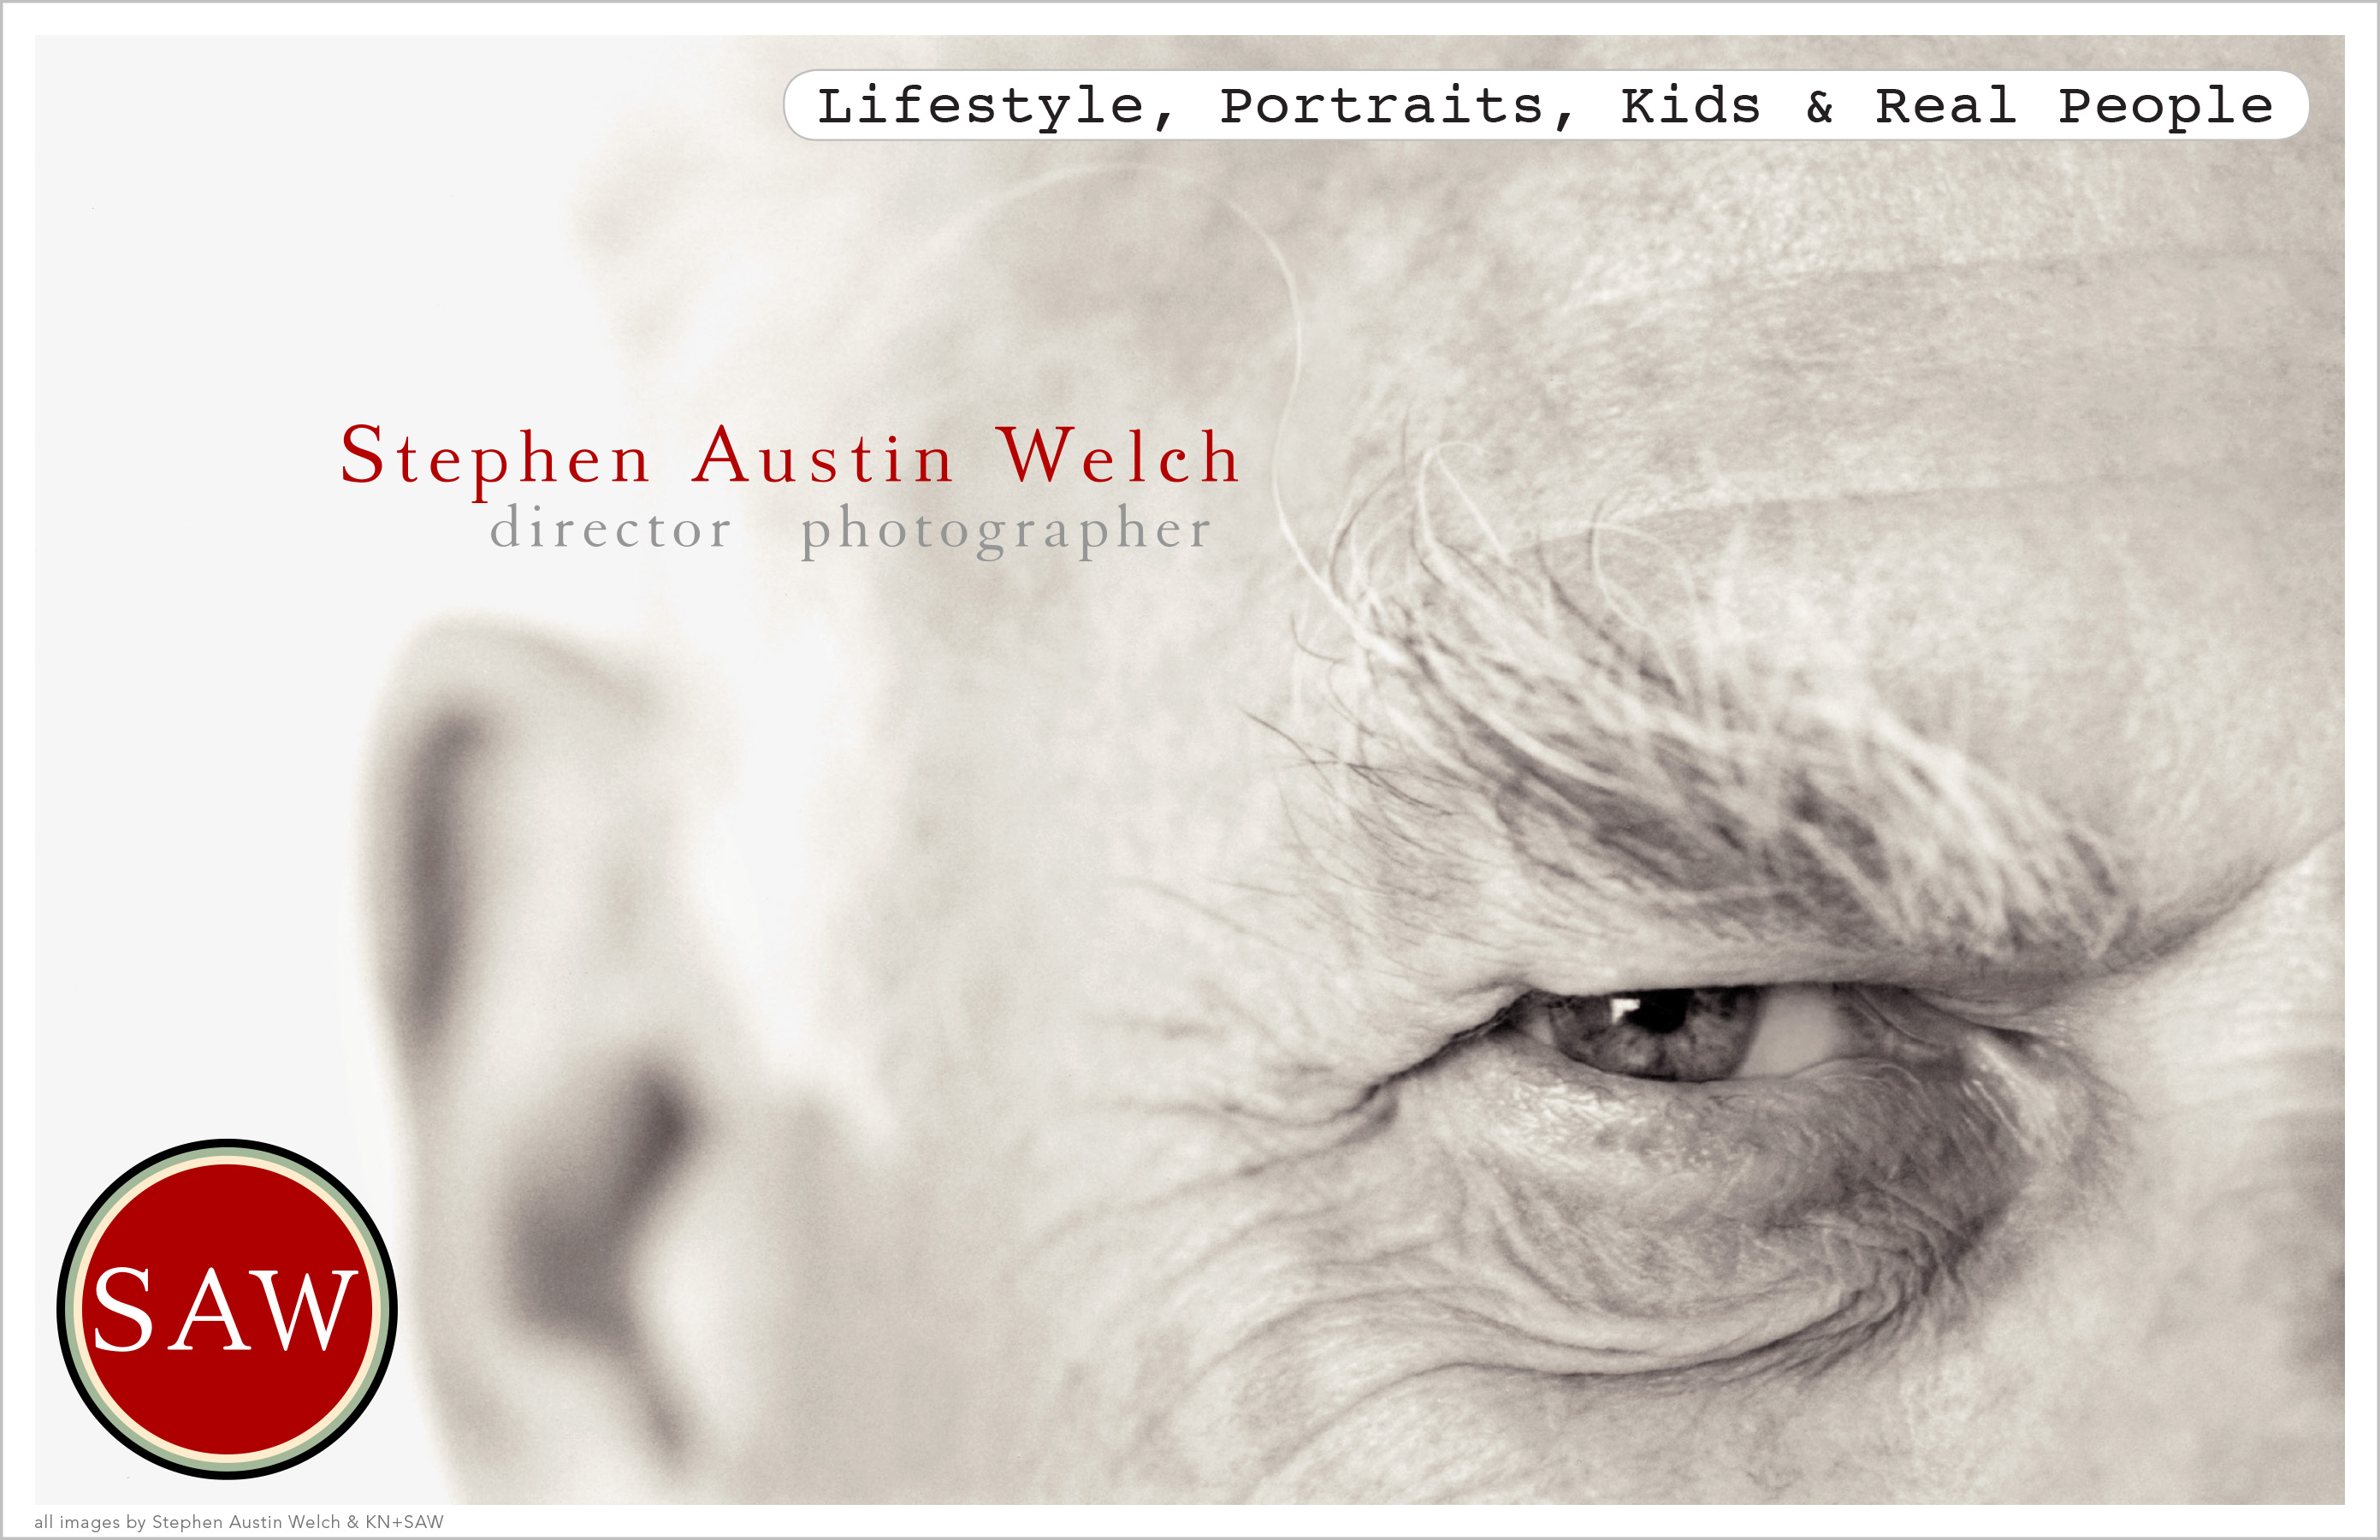 overview-lifestyle-portraits-kids-real-people-014-knsaw-stephen-austin-welch-director-photographer